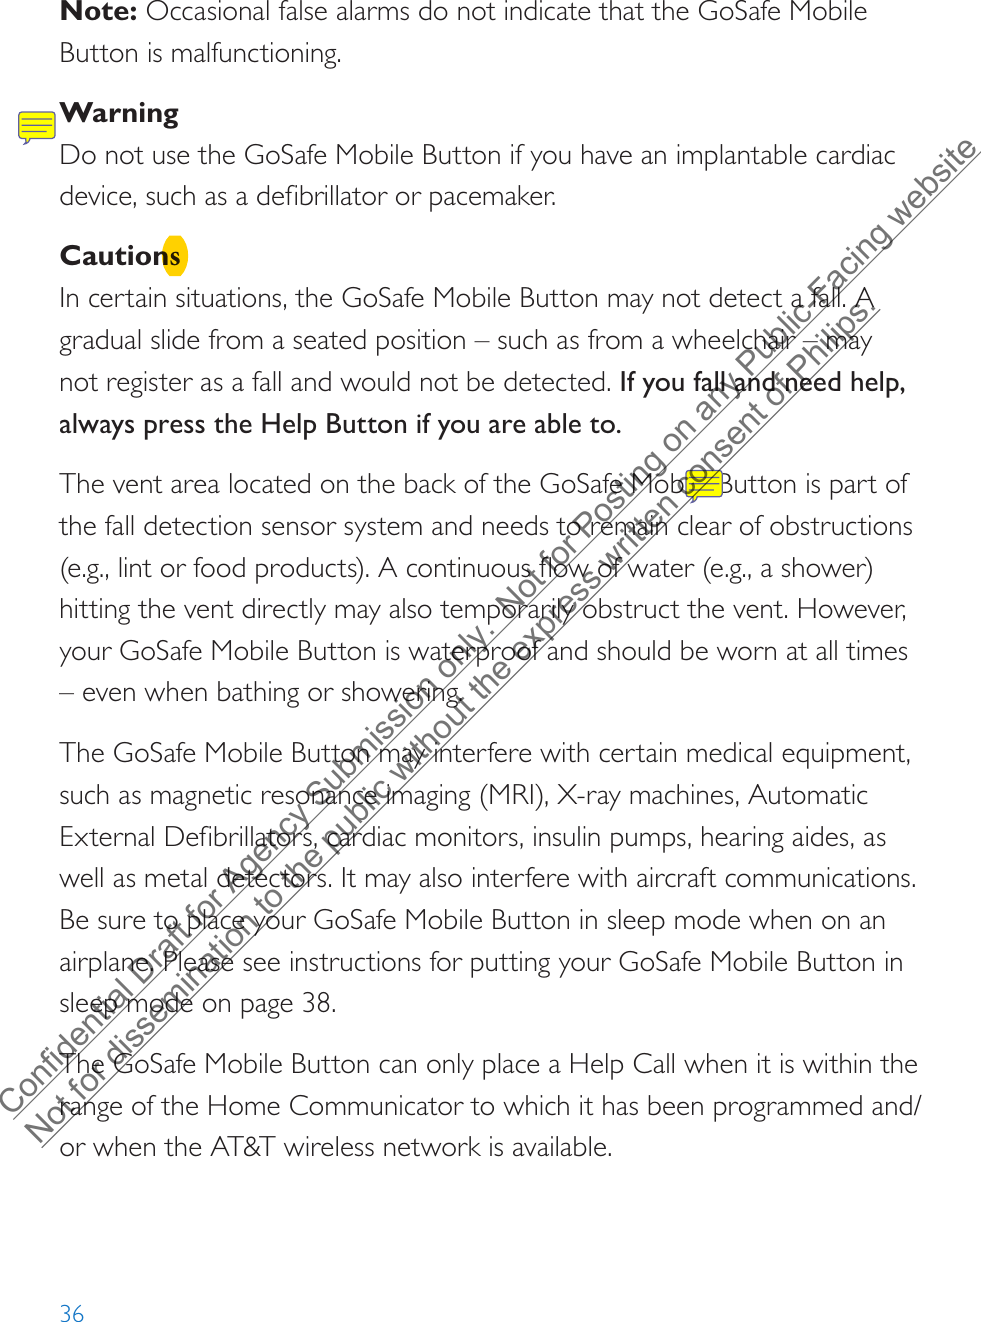 36Note: Occasional false alarms do not indicate that the GoSafe Mobile Button is malfunctioning. WarningDo not use the GoSafe Mobile Button if you have an implantable cardiac device, such as a defibrillator or pacemaker.CautionsIn certain situations, the GoSafe Mobile Button may not detect a fall. A gradual slide from a seated position – such as from a wheelchair – may not register as a fall and would not be detected. If you fall and need help, always press the Help Button if you are able to.The vent area located on the back of the GoSafe Mobile Button is part of the fall detection sensor system and needs to remain clear of obstructions (e.g., lint or food products). A continuous flow of water (e.g., a shower) hitting the vent directly may also temporarily obstruct the vent. However, your GoSafe Mobile Button is waterproof and should be worn at all times –even when bathing or showering.The GoSafe Mobile Button may interfere with certain medical equipment, such as magnetic resonance imaging (MRI), X-ray machines, Automatic External Defibrillators, cardiac monitors, insulin pumps, hearing aides, as well as metal detectors. It may also interfere with aircraft communications. Be sure to place your GoSafe Mobile Button in sleep mode when on an airplane. Please see instructions for putting your GoSafe Mobile Button in sleep mode on page 38.The GoSafe Mobile Button can only place a Help Call when it is within the range of the Home Communicator to which it has been programmed and/or when the AT&amp;T wireless network is available.Confidential Draft for Agency Submission only.  Not for Posting on any Public-Facing website Not for dissemination to the public without the express written consent of Philips.  